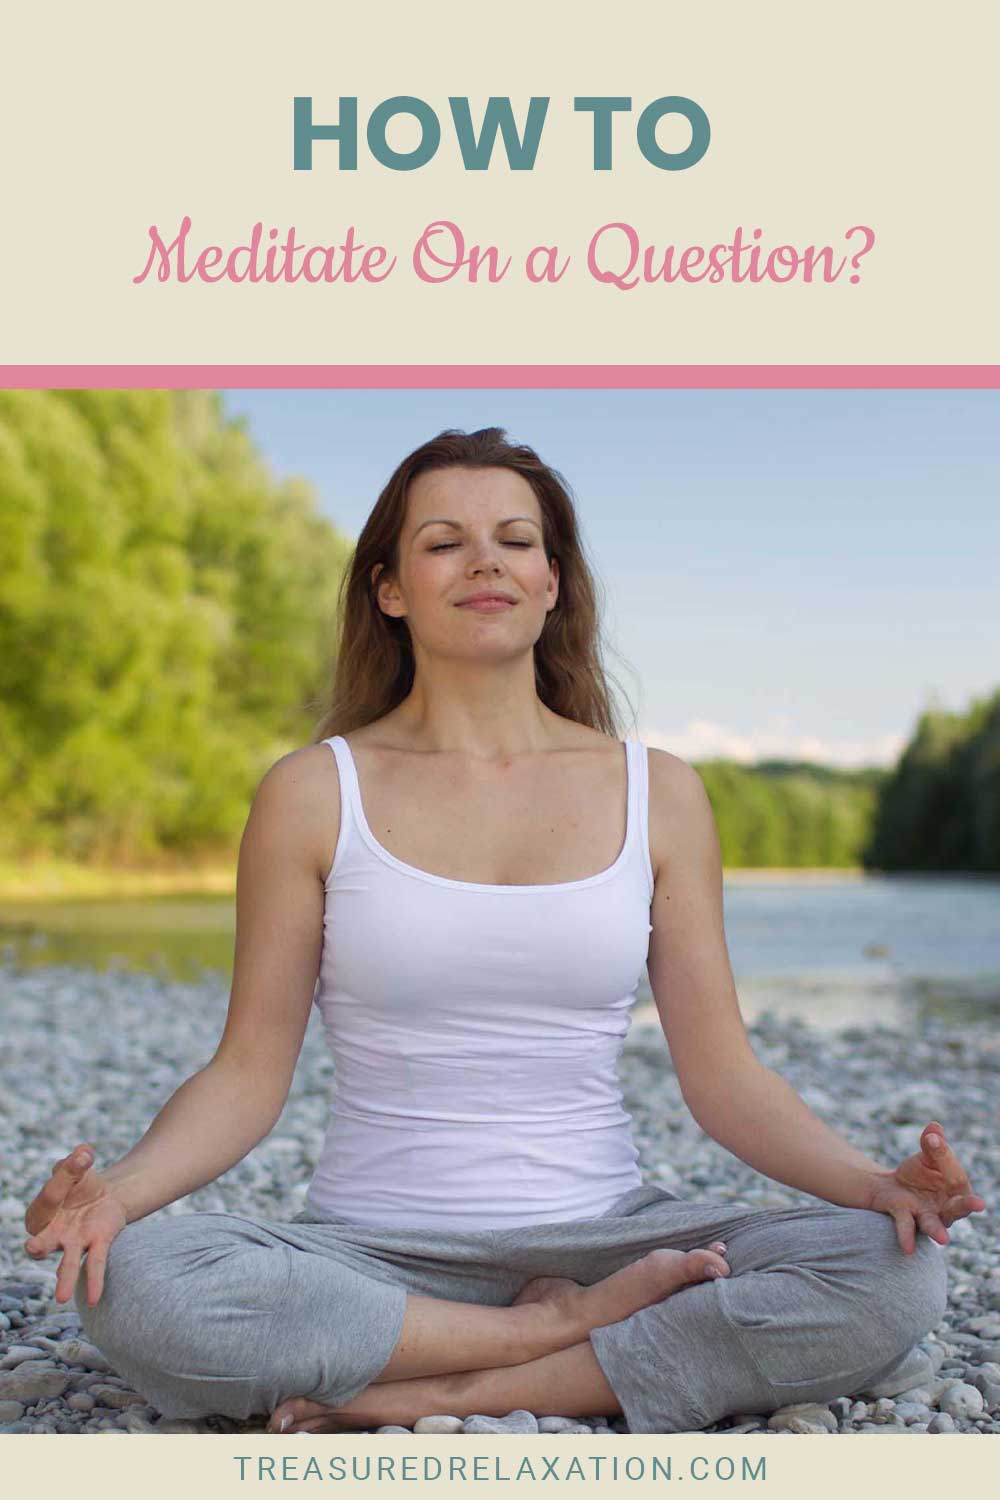 How to Meditate On a Question?